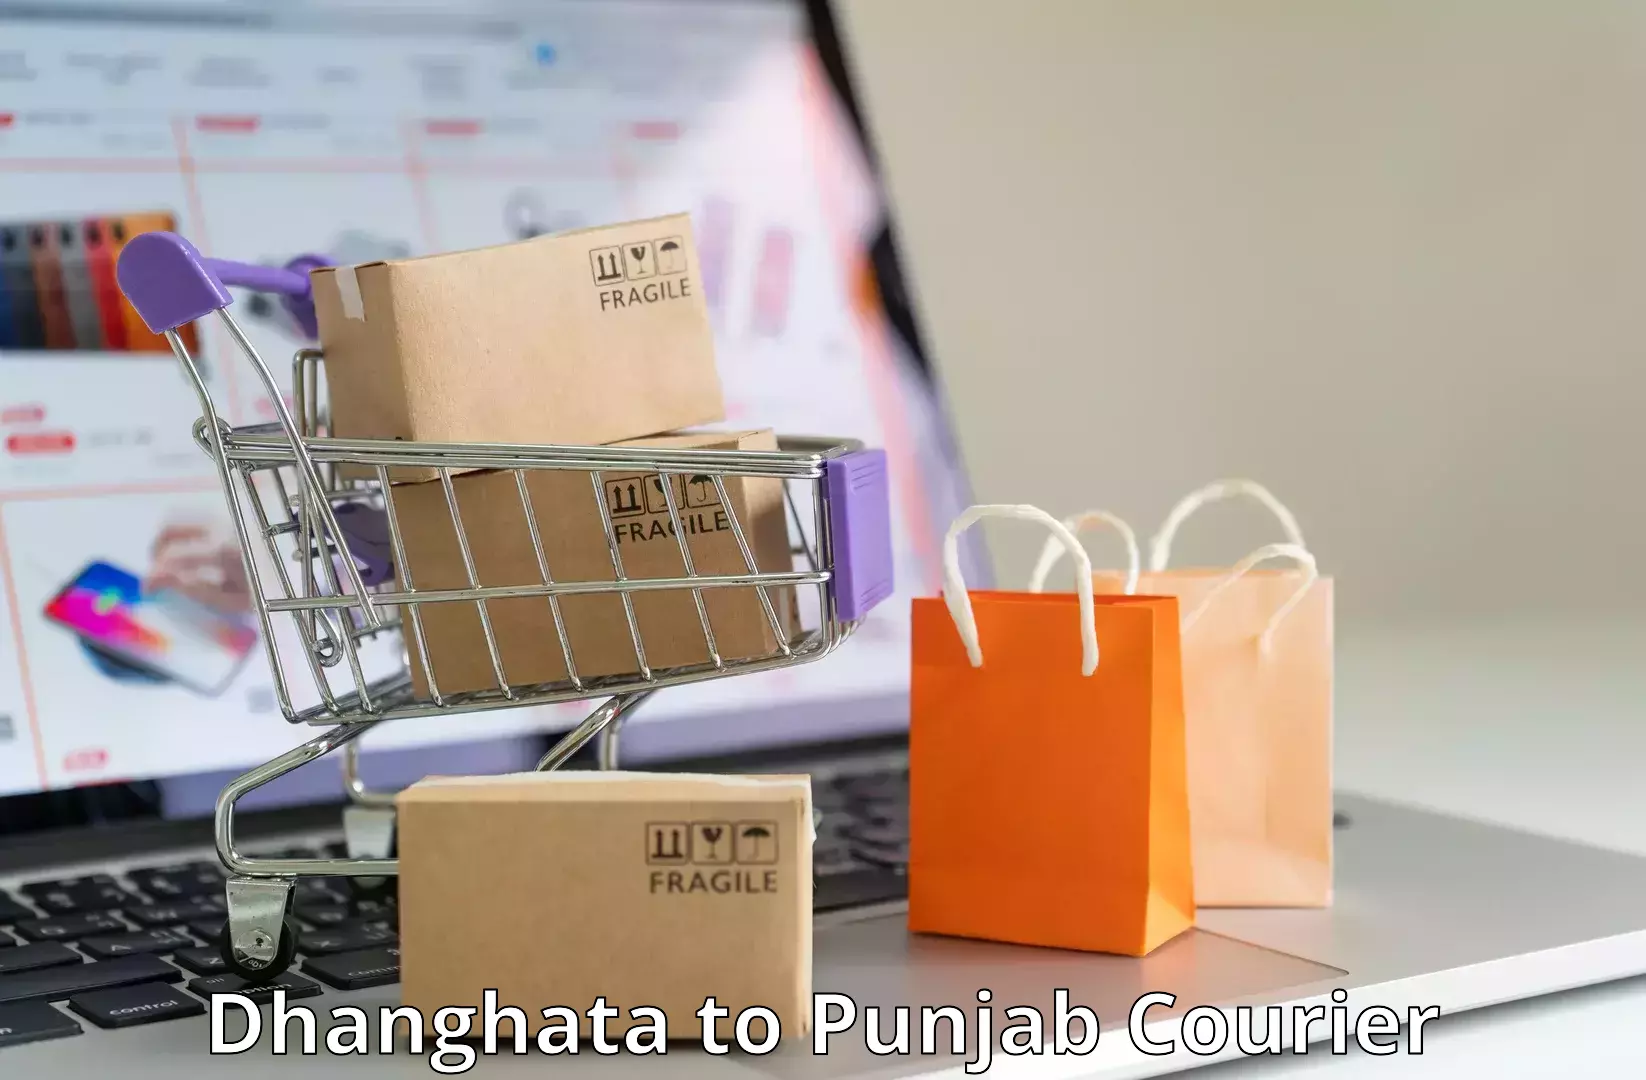 International courier networks Dhanghata to Punjab